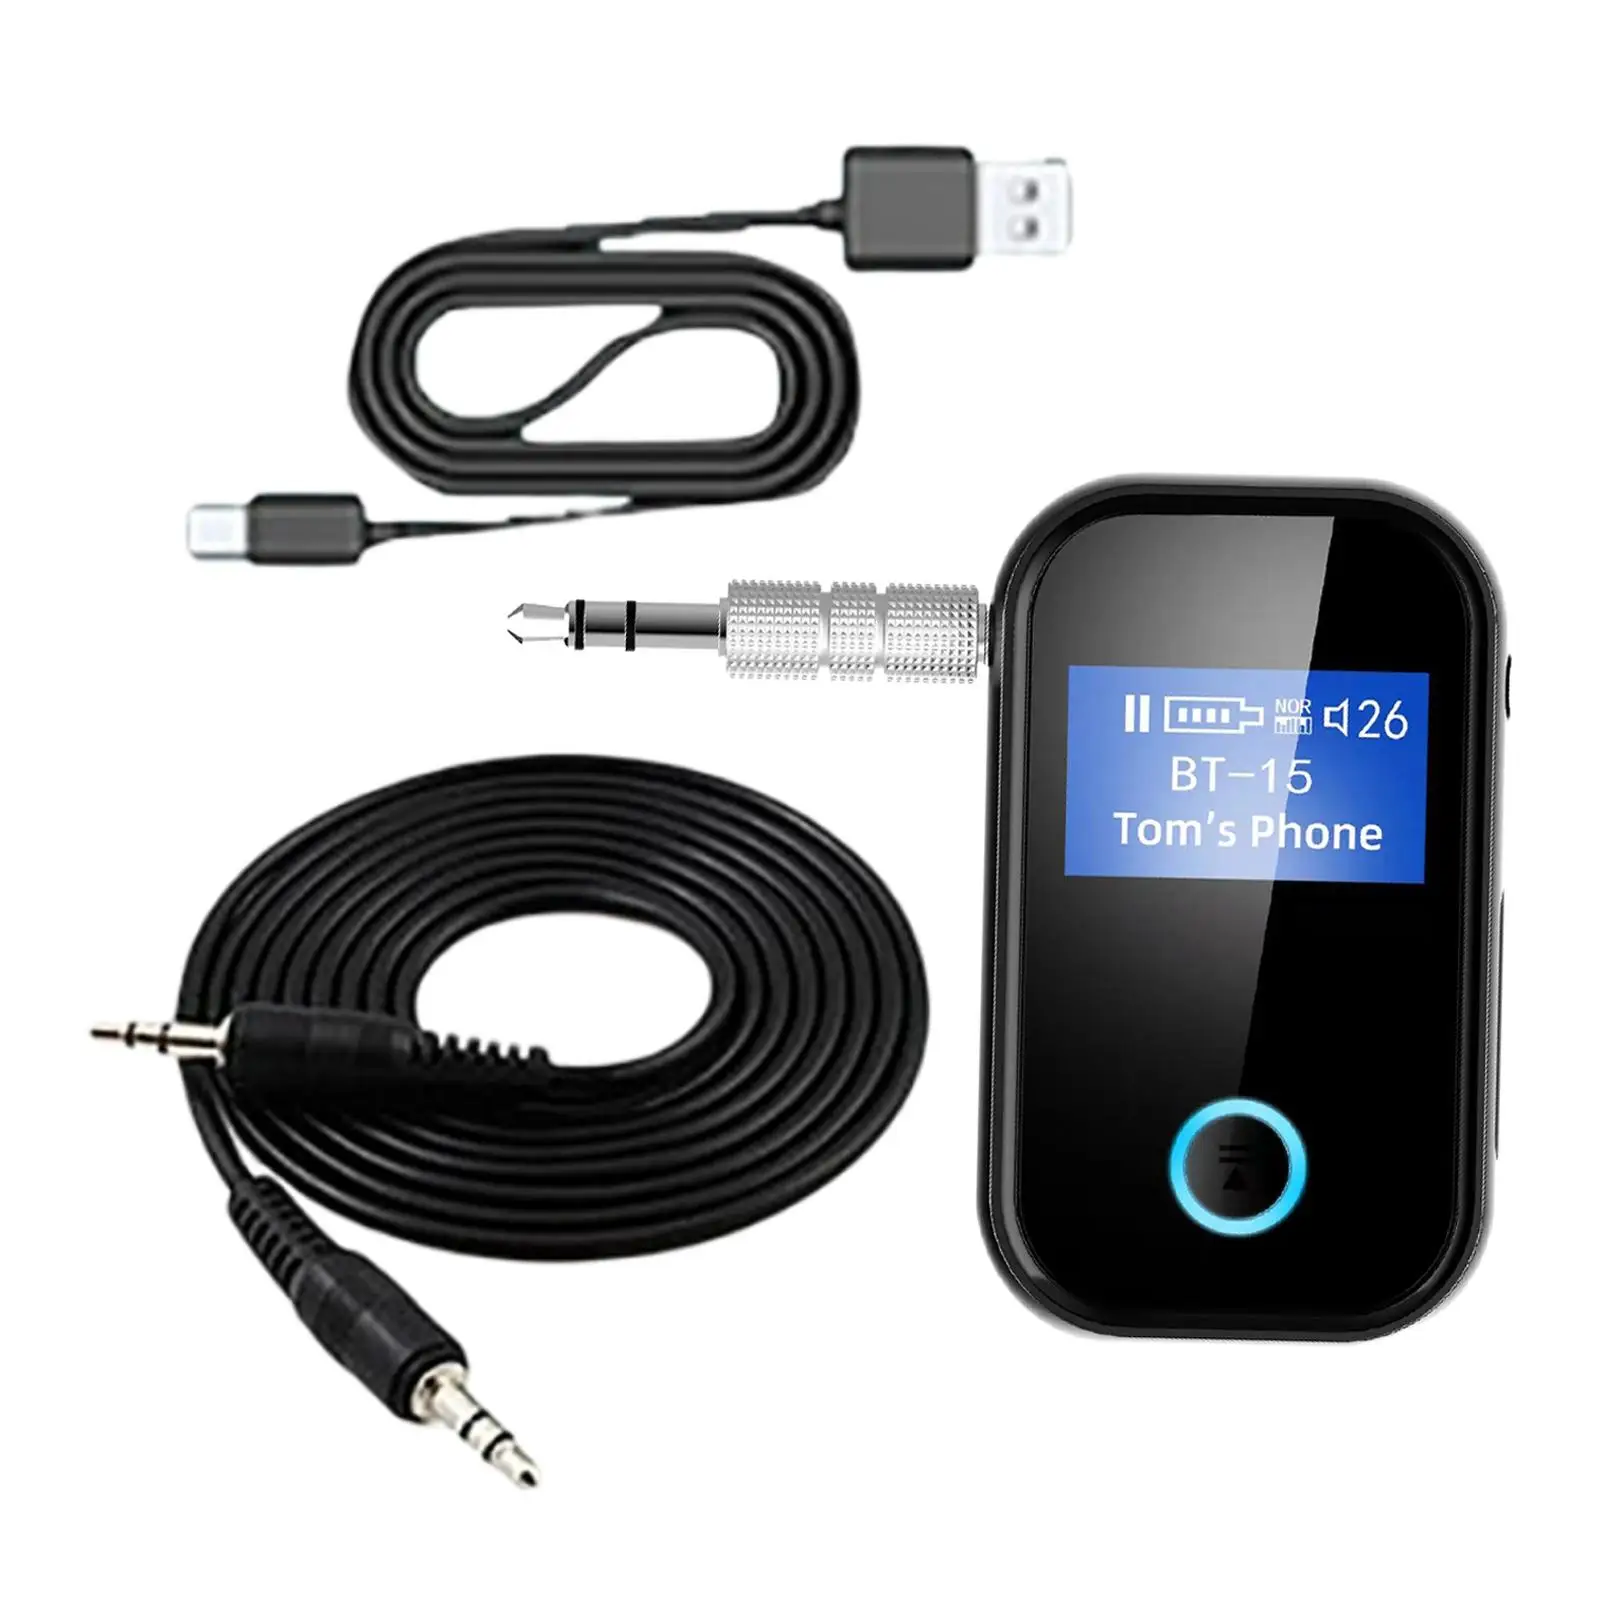 Portable Car Bluetooth 5.0 Transmitter Receiver HD Stereo Sound 3.5mm AUX Audio Adapter for Phone Sound System Music Streaming